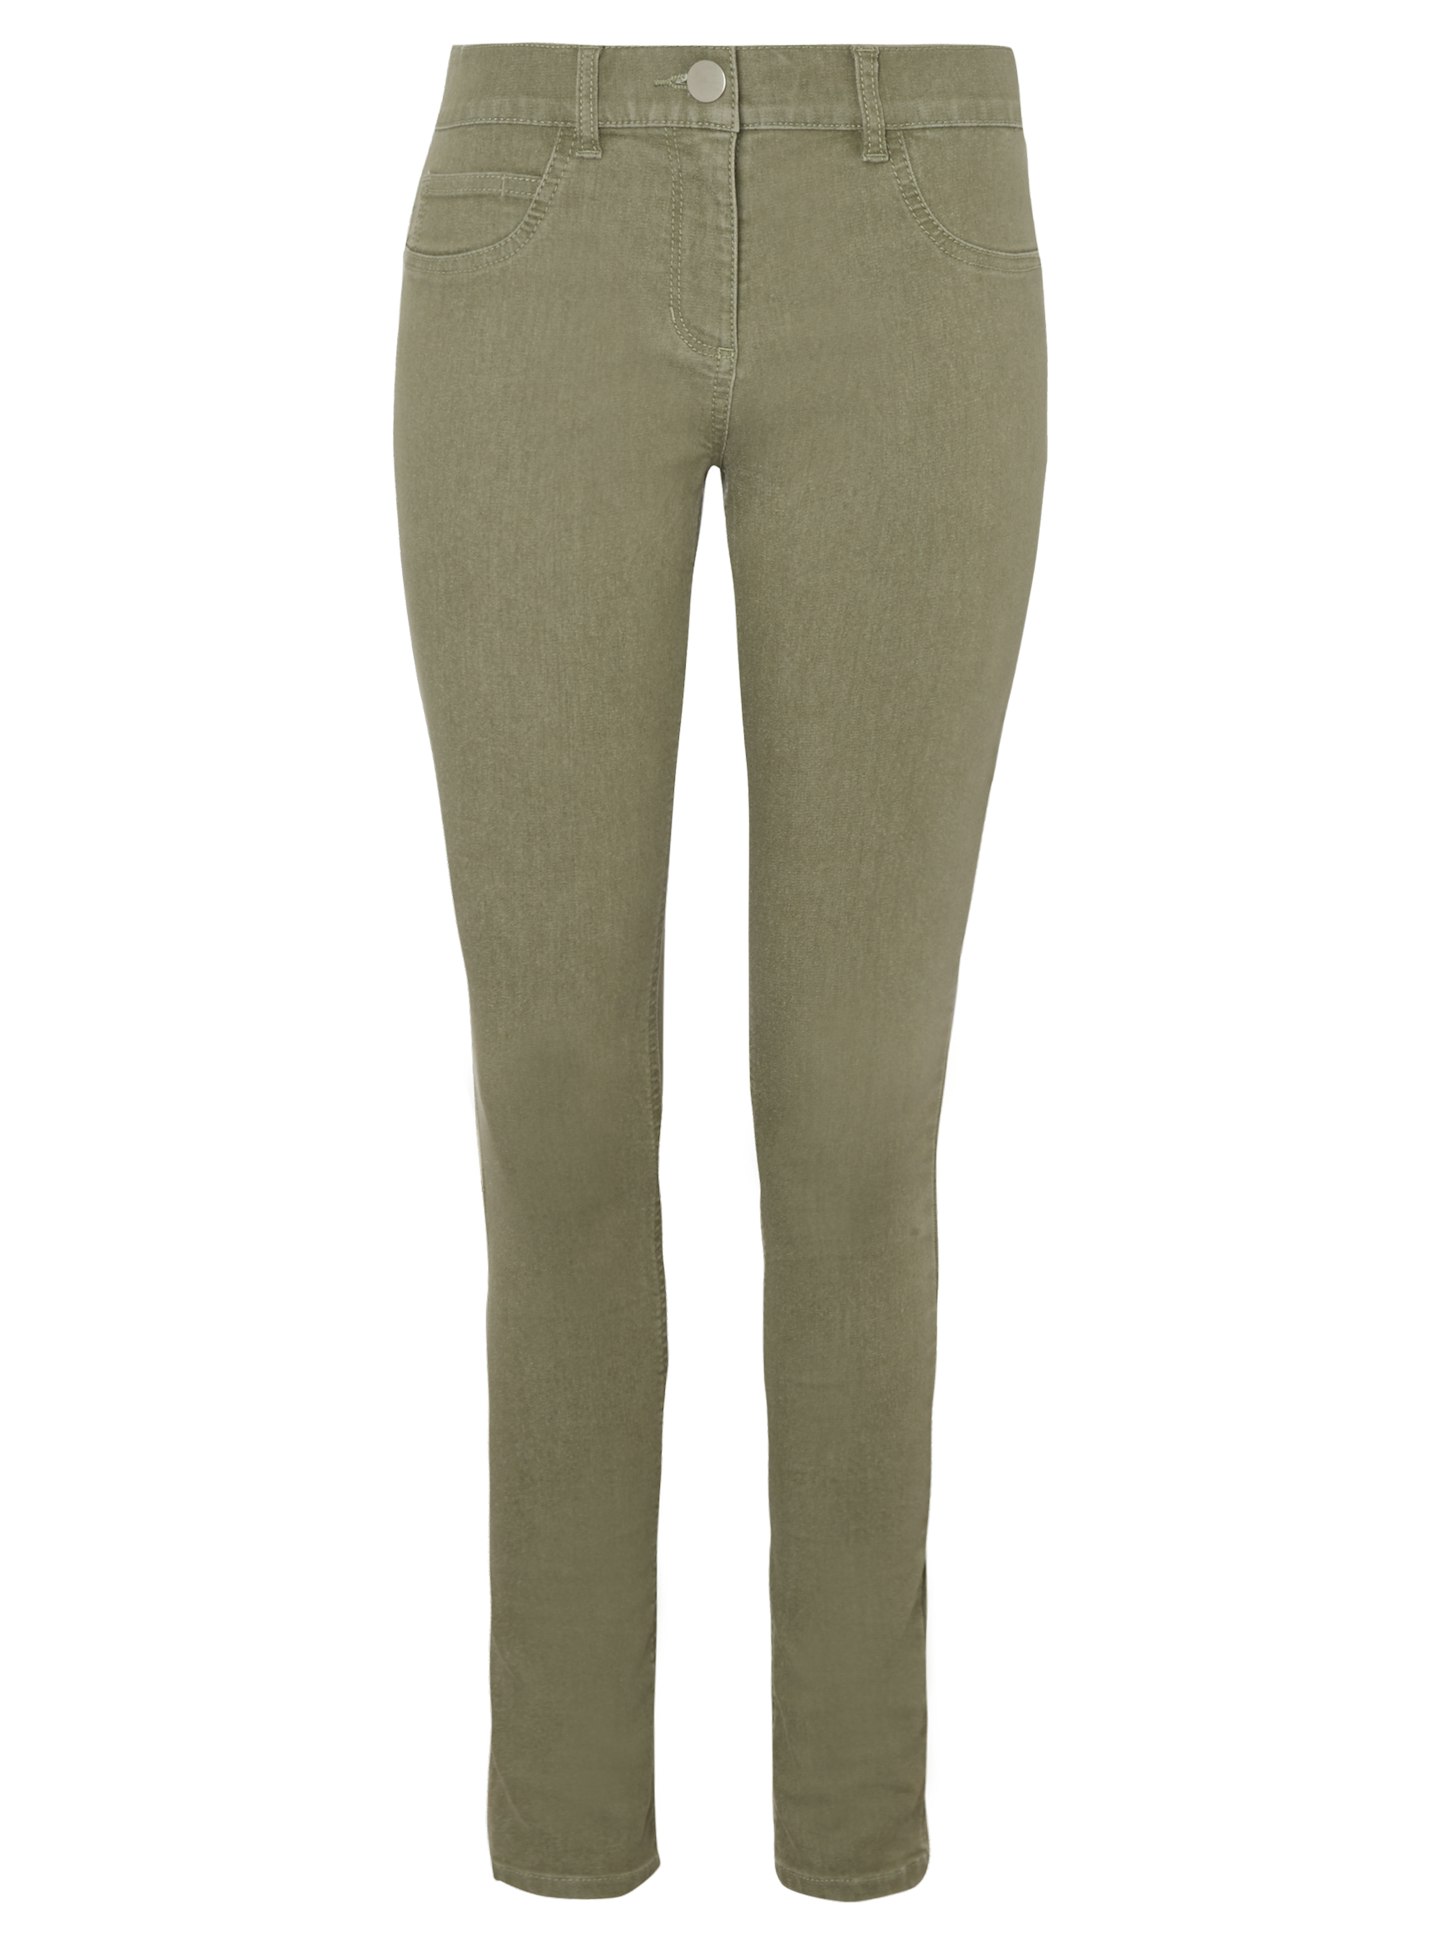 Olive jeans £20